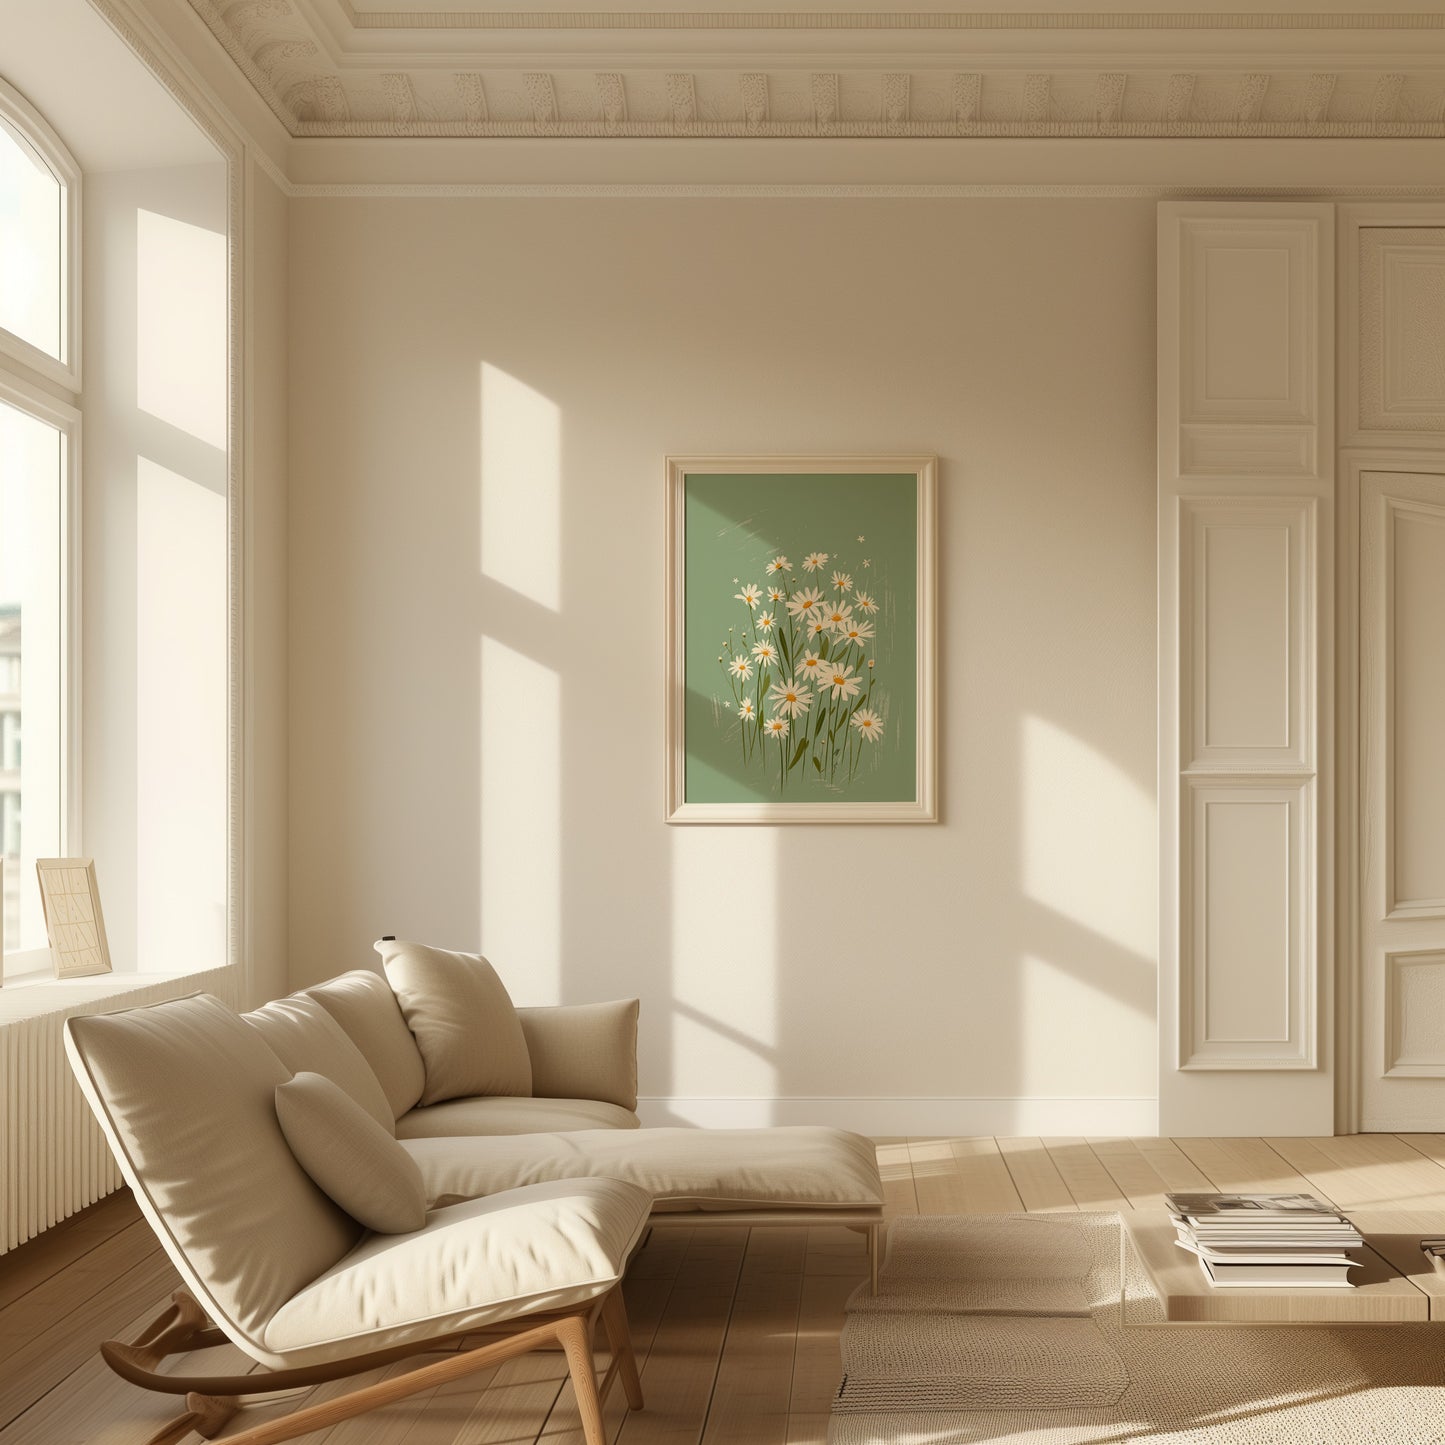 A cozy, sunlit room with a sofa and a floral painting on the wall.